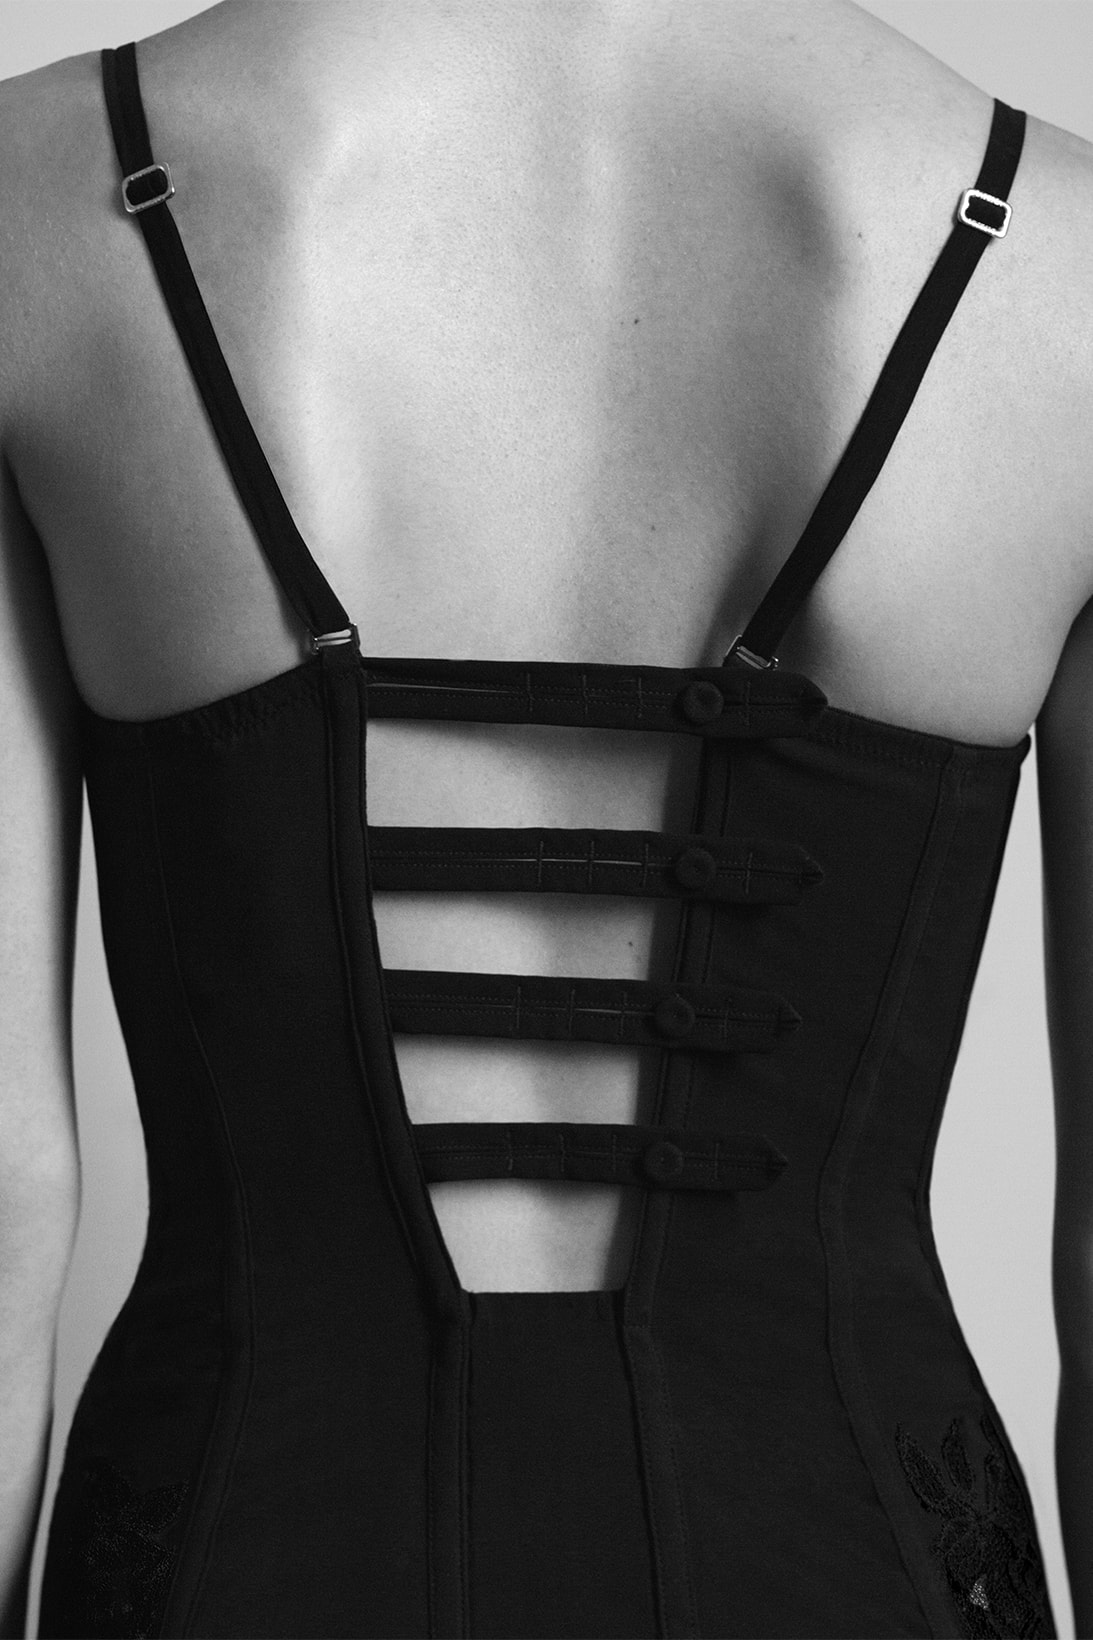 La Perla Launches 11 New Colletions For FW20